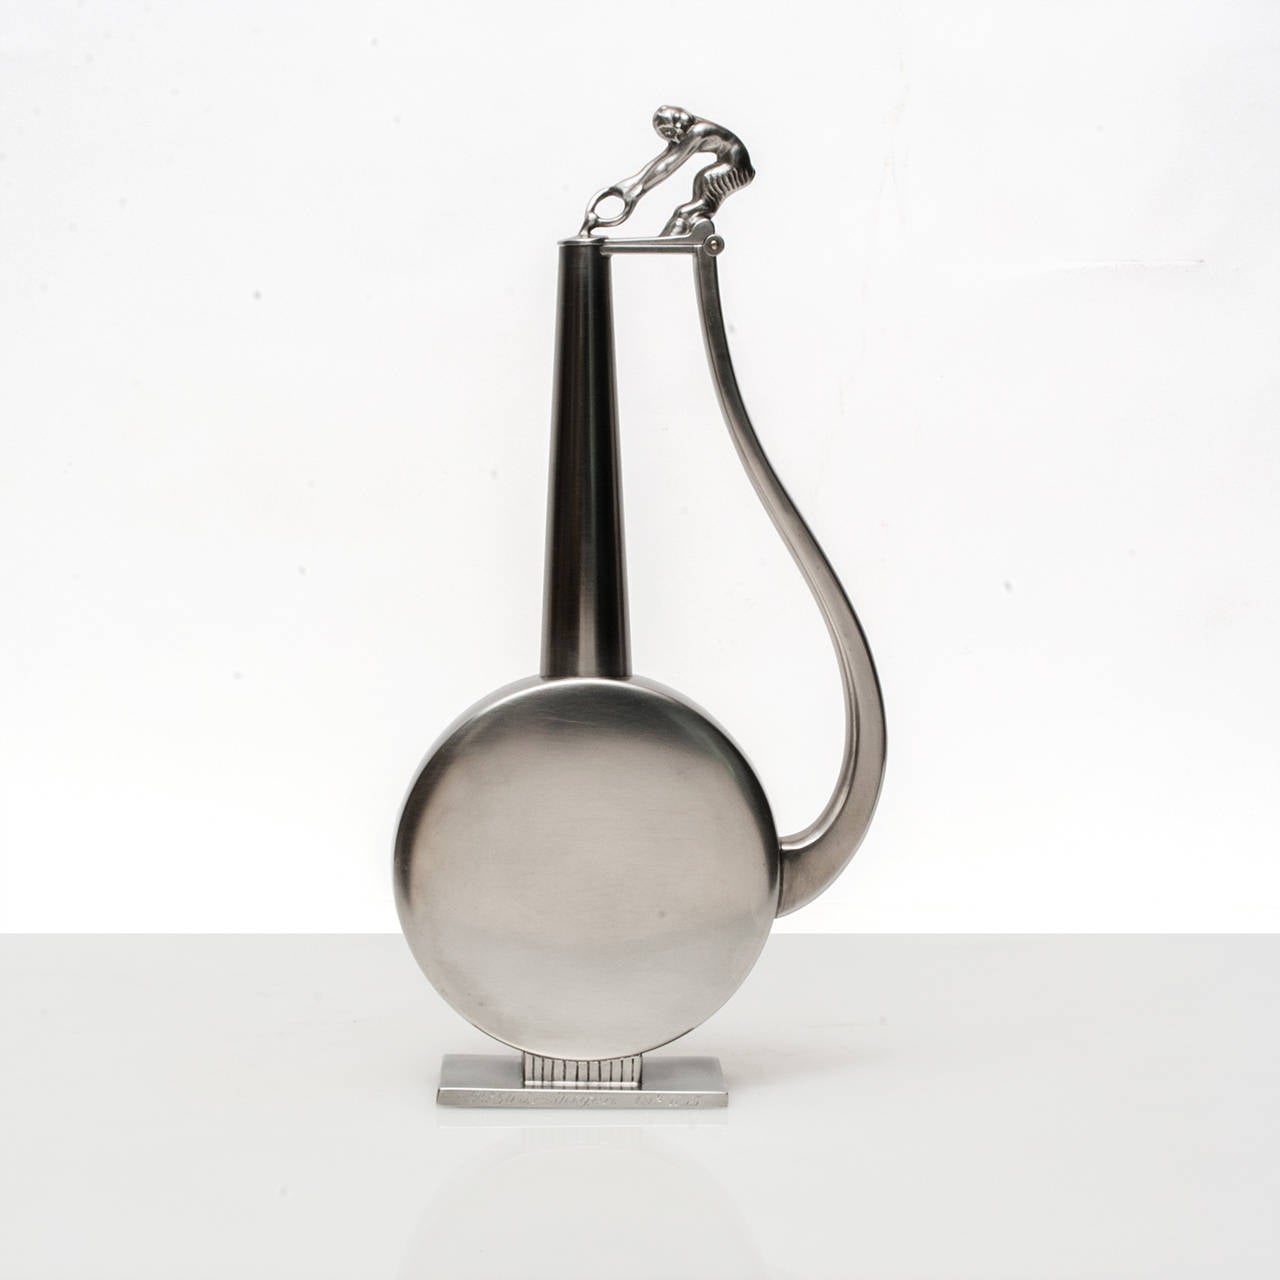 Swedish Art Deco solid polished pewter bottle with stopper. A figure of a Satyr or Faun sitting atop pulling a ring serves as a handle. An inscription is engraved at the front of the base. Made by GAB (Guldsmedsaktiebolaget) and stamped G8 (1933)